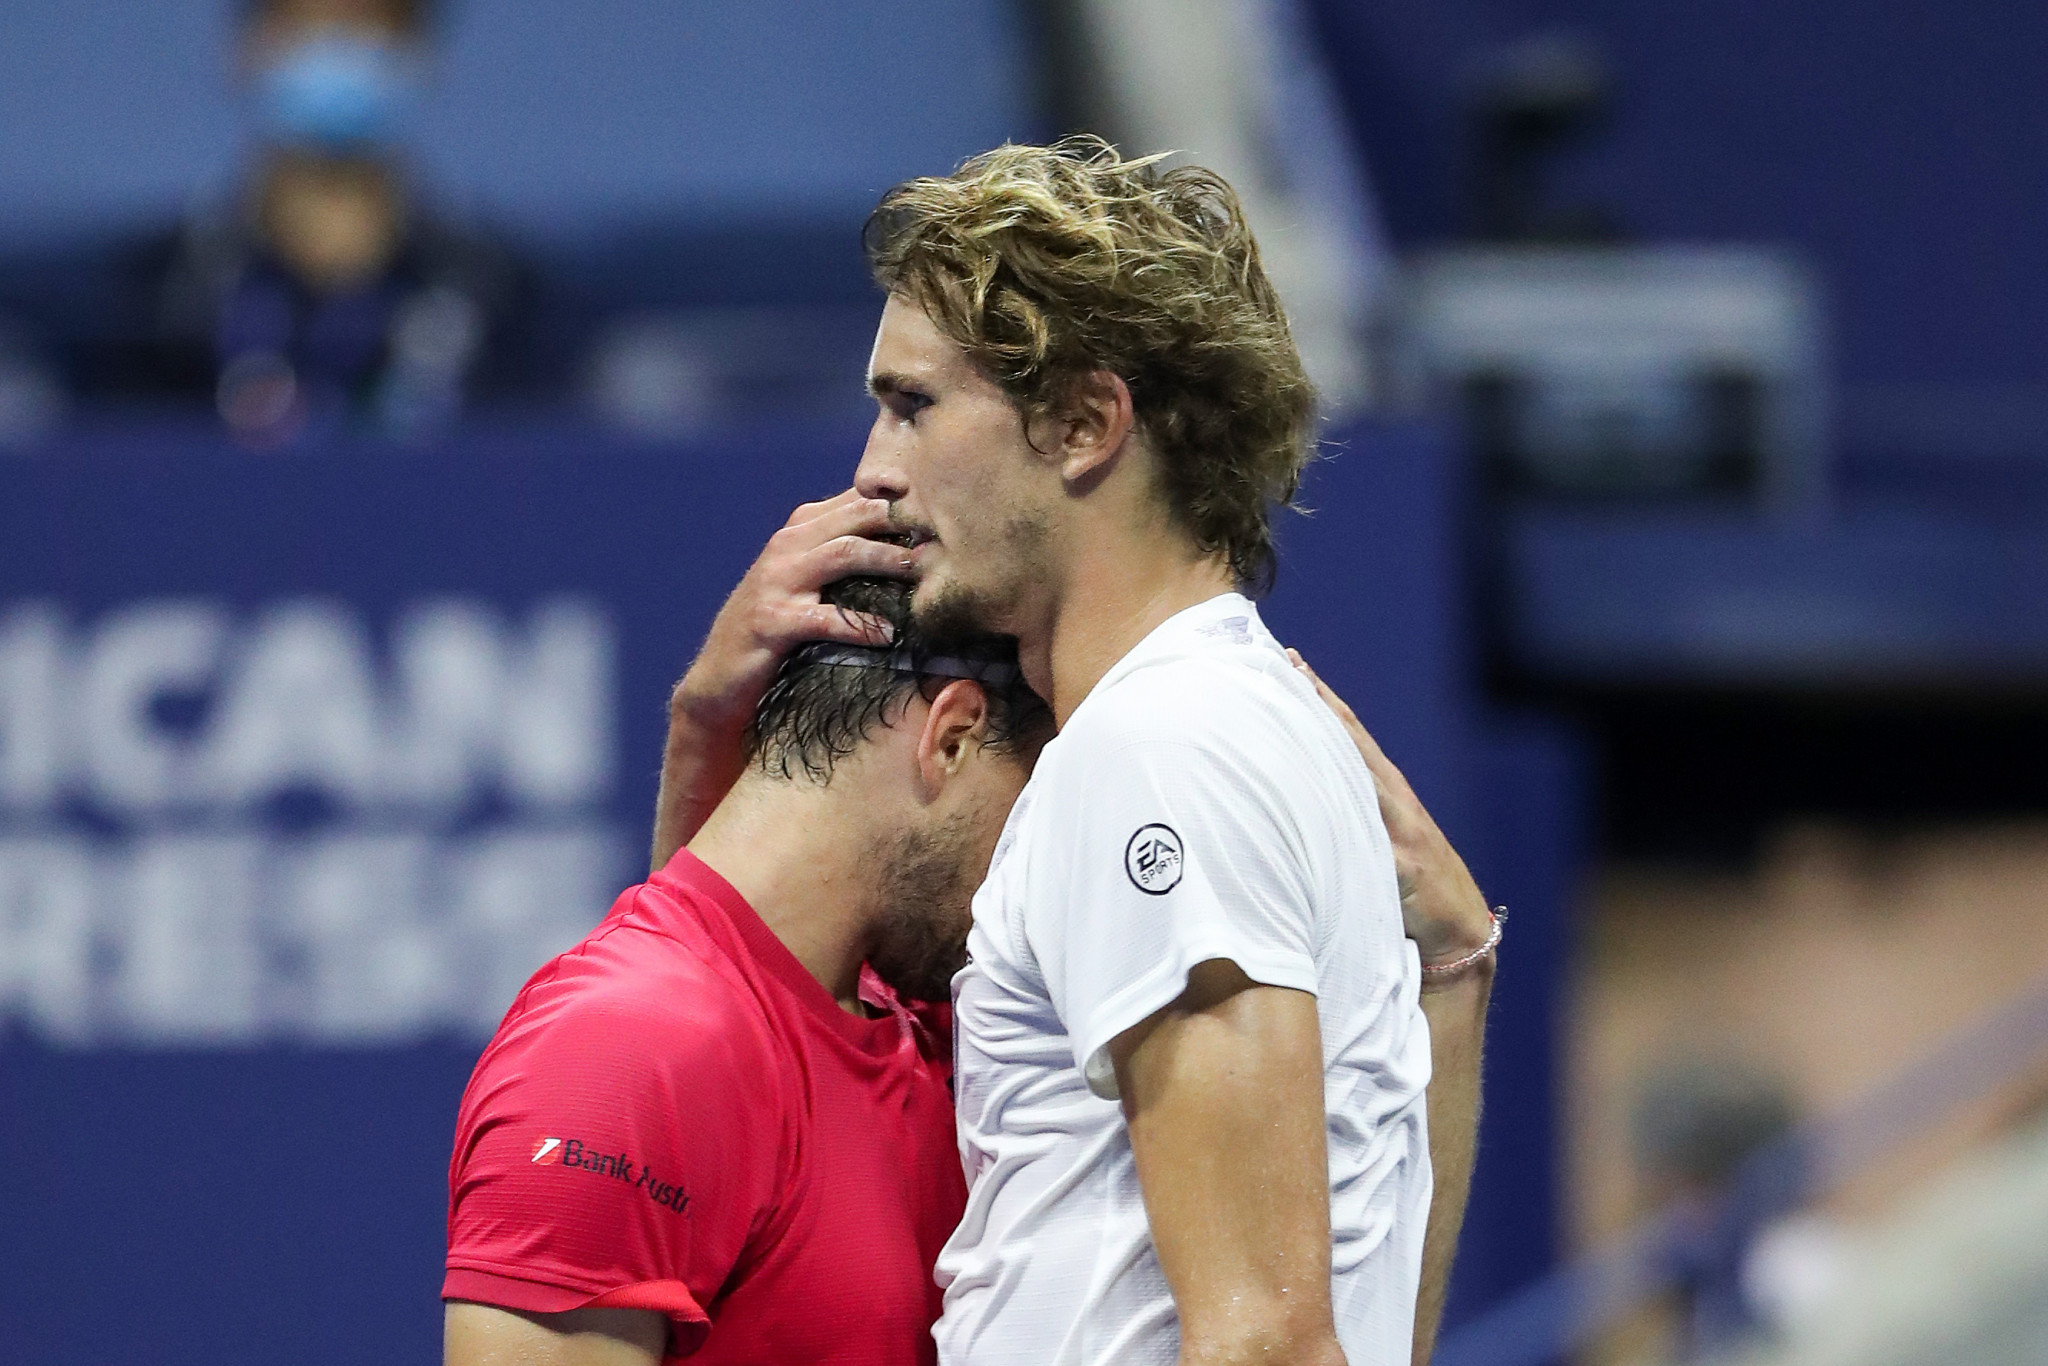 Alexander Zverev offering his congratulations to the overwhelmed Dominic Thiem after the Austrian won his first Grand Slam ©Getty Images